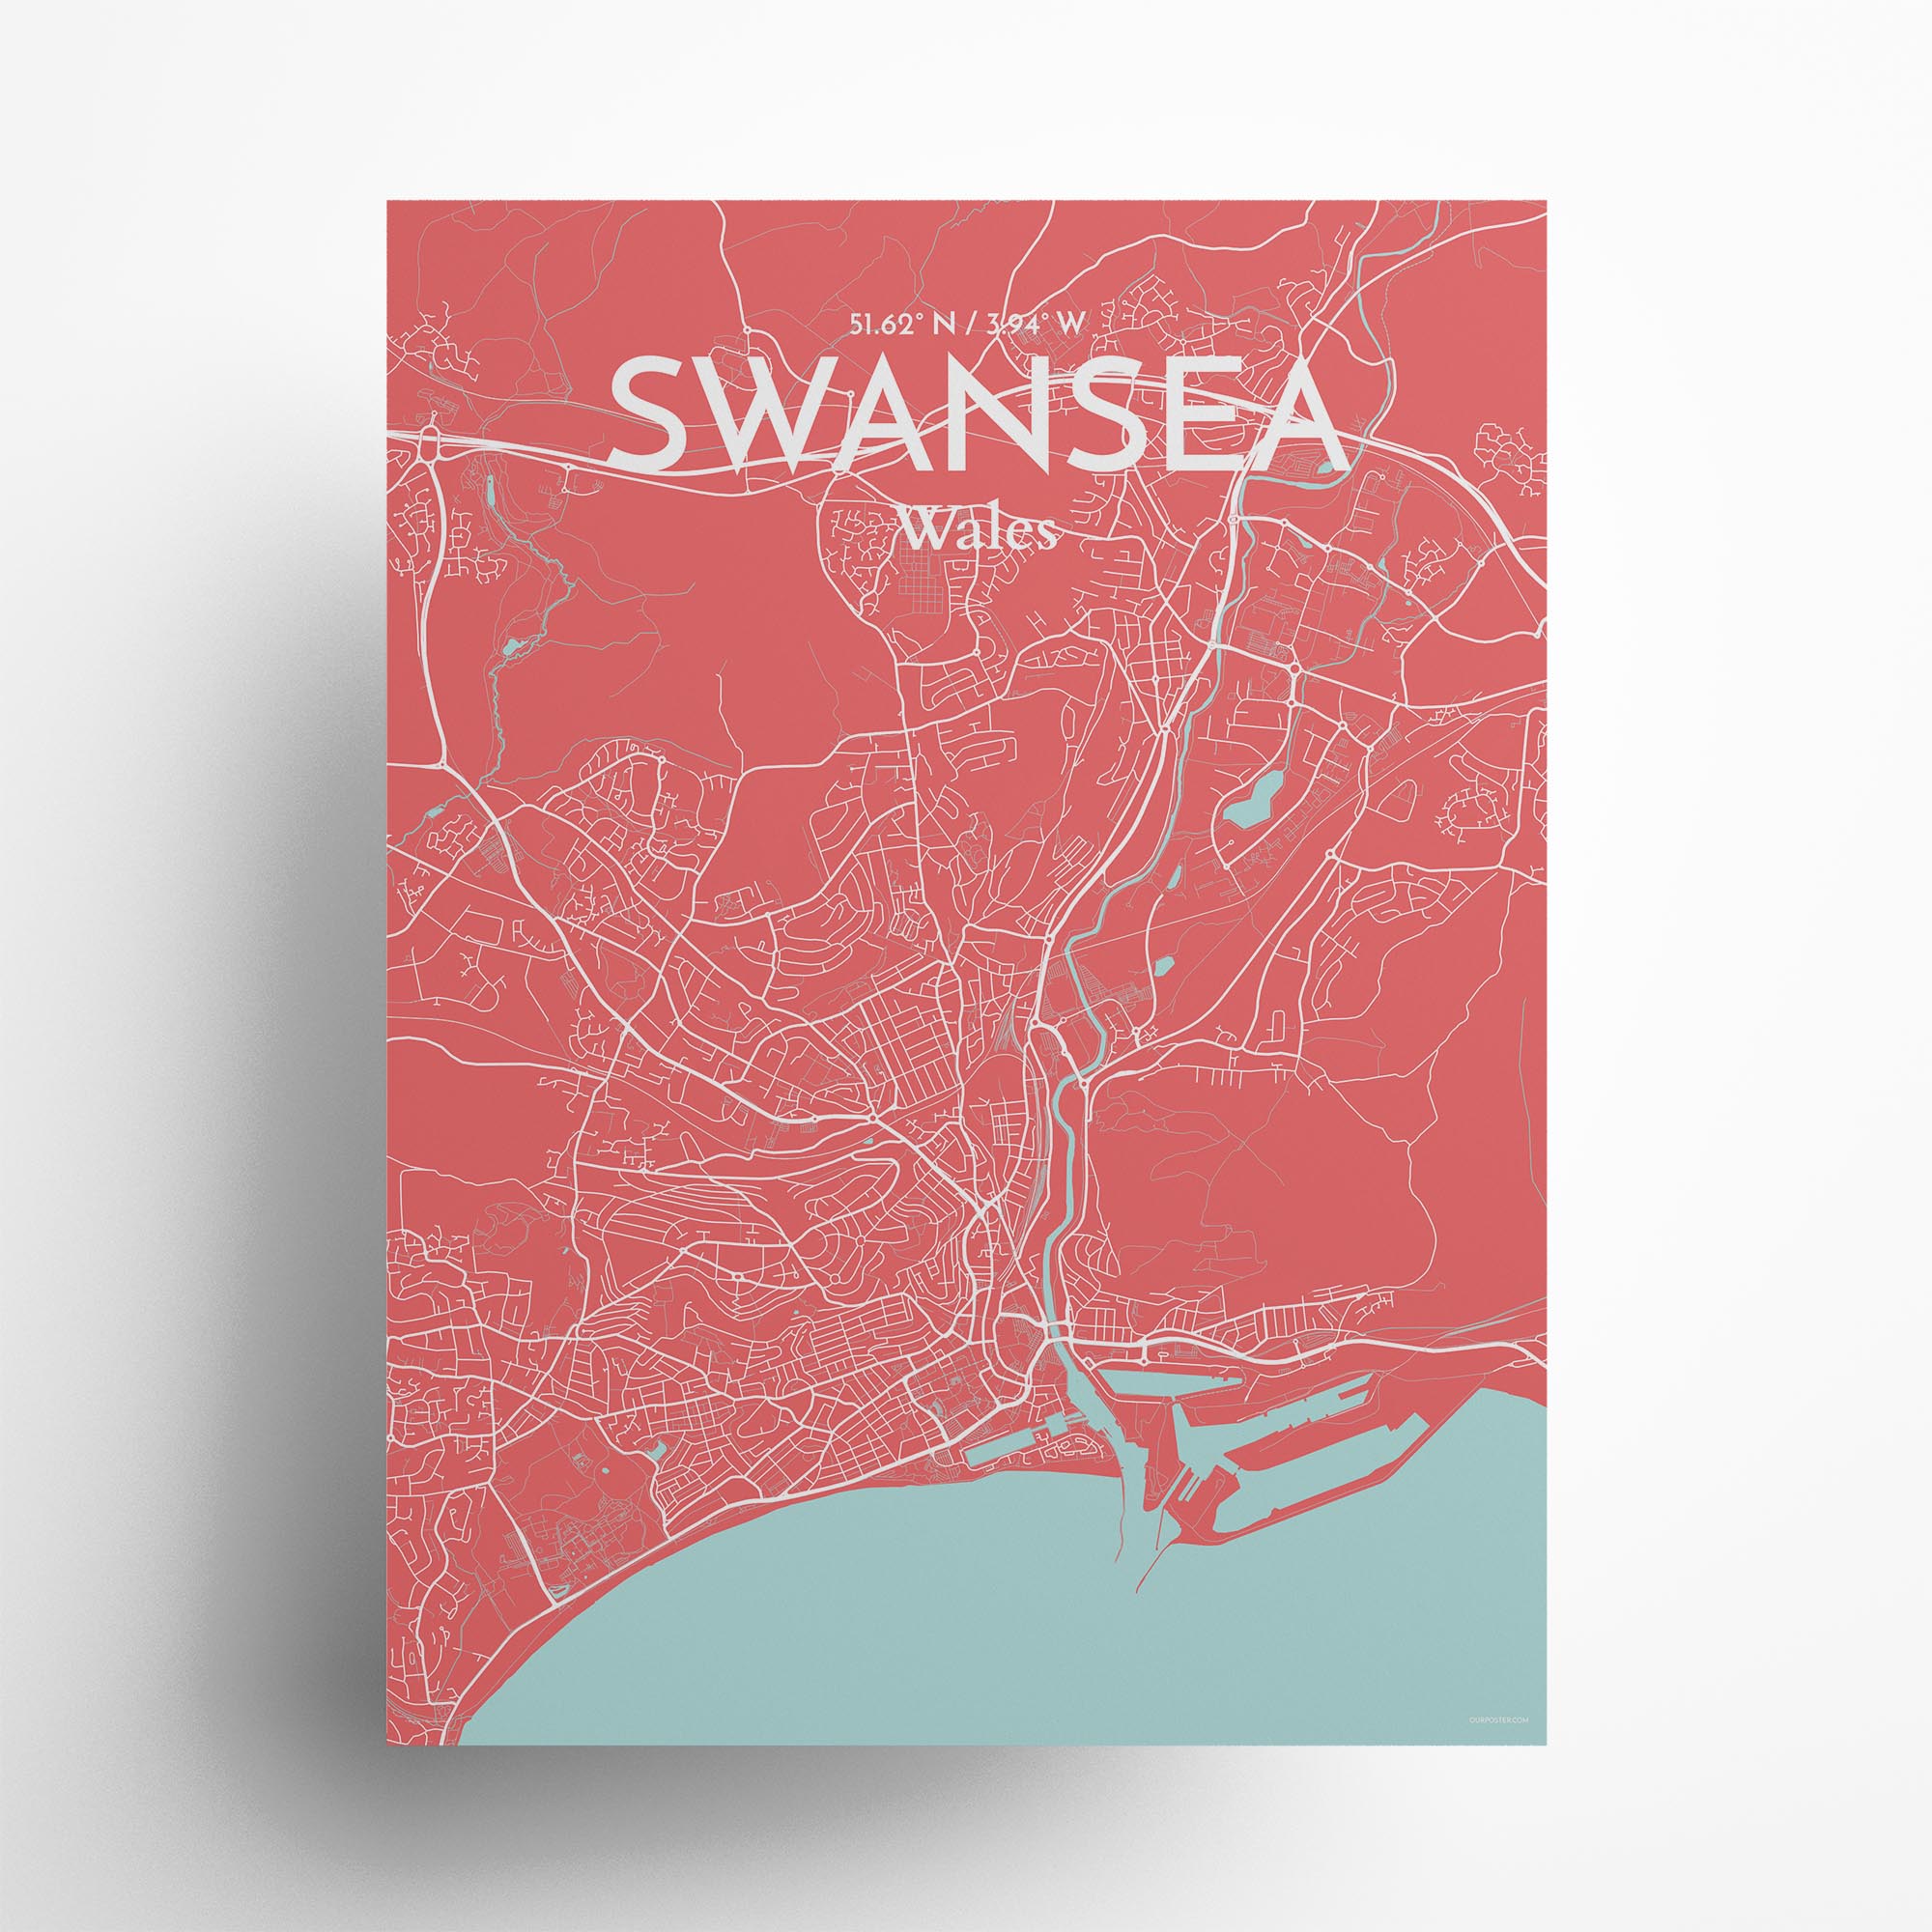 Swansea city map poster in Maritime of size 18" x 24"